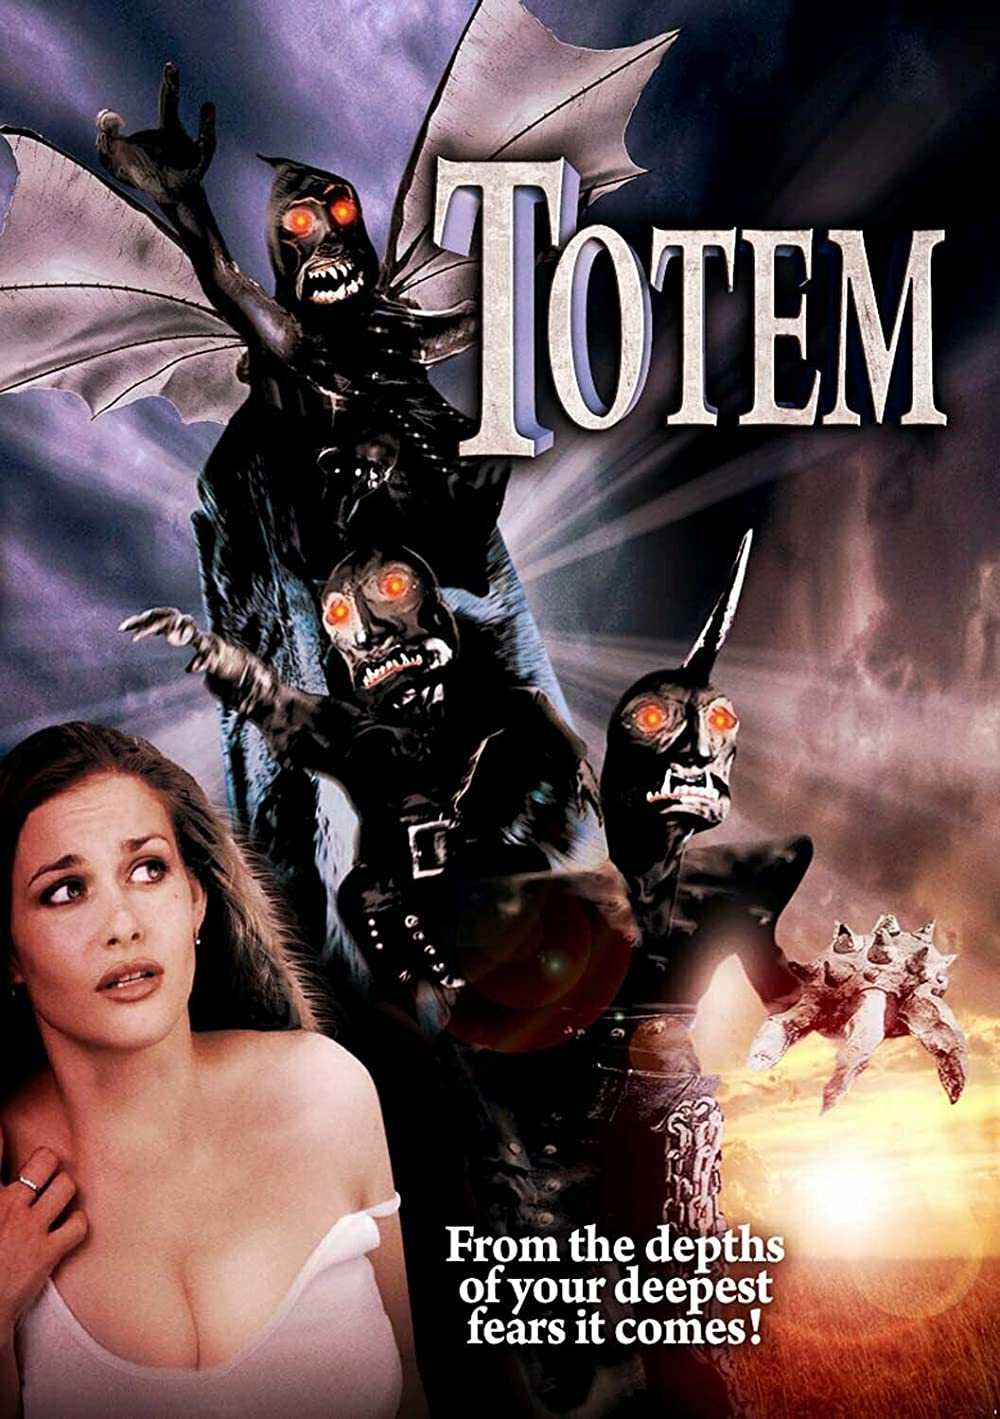 The Curse of The Totem – House of Film